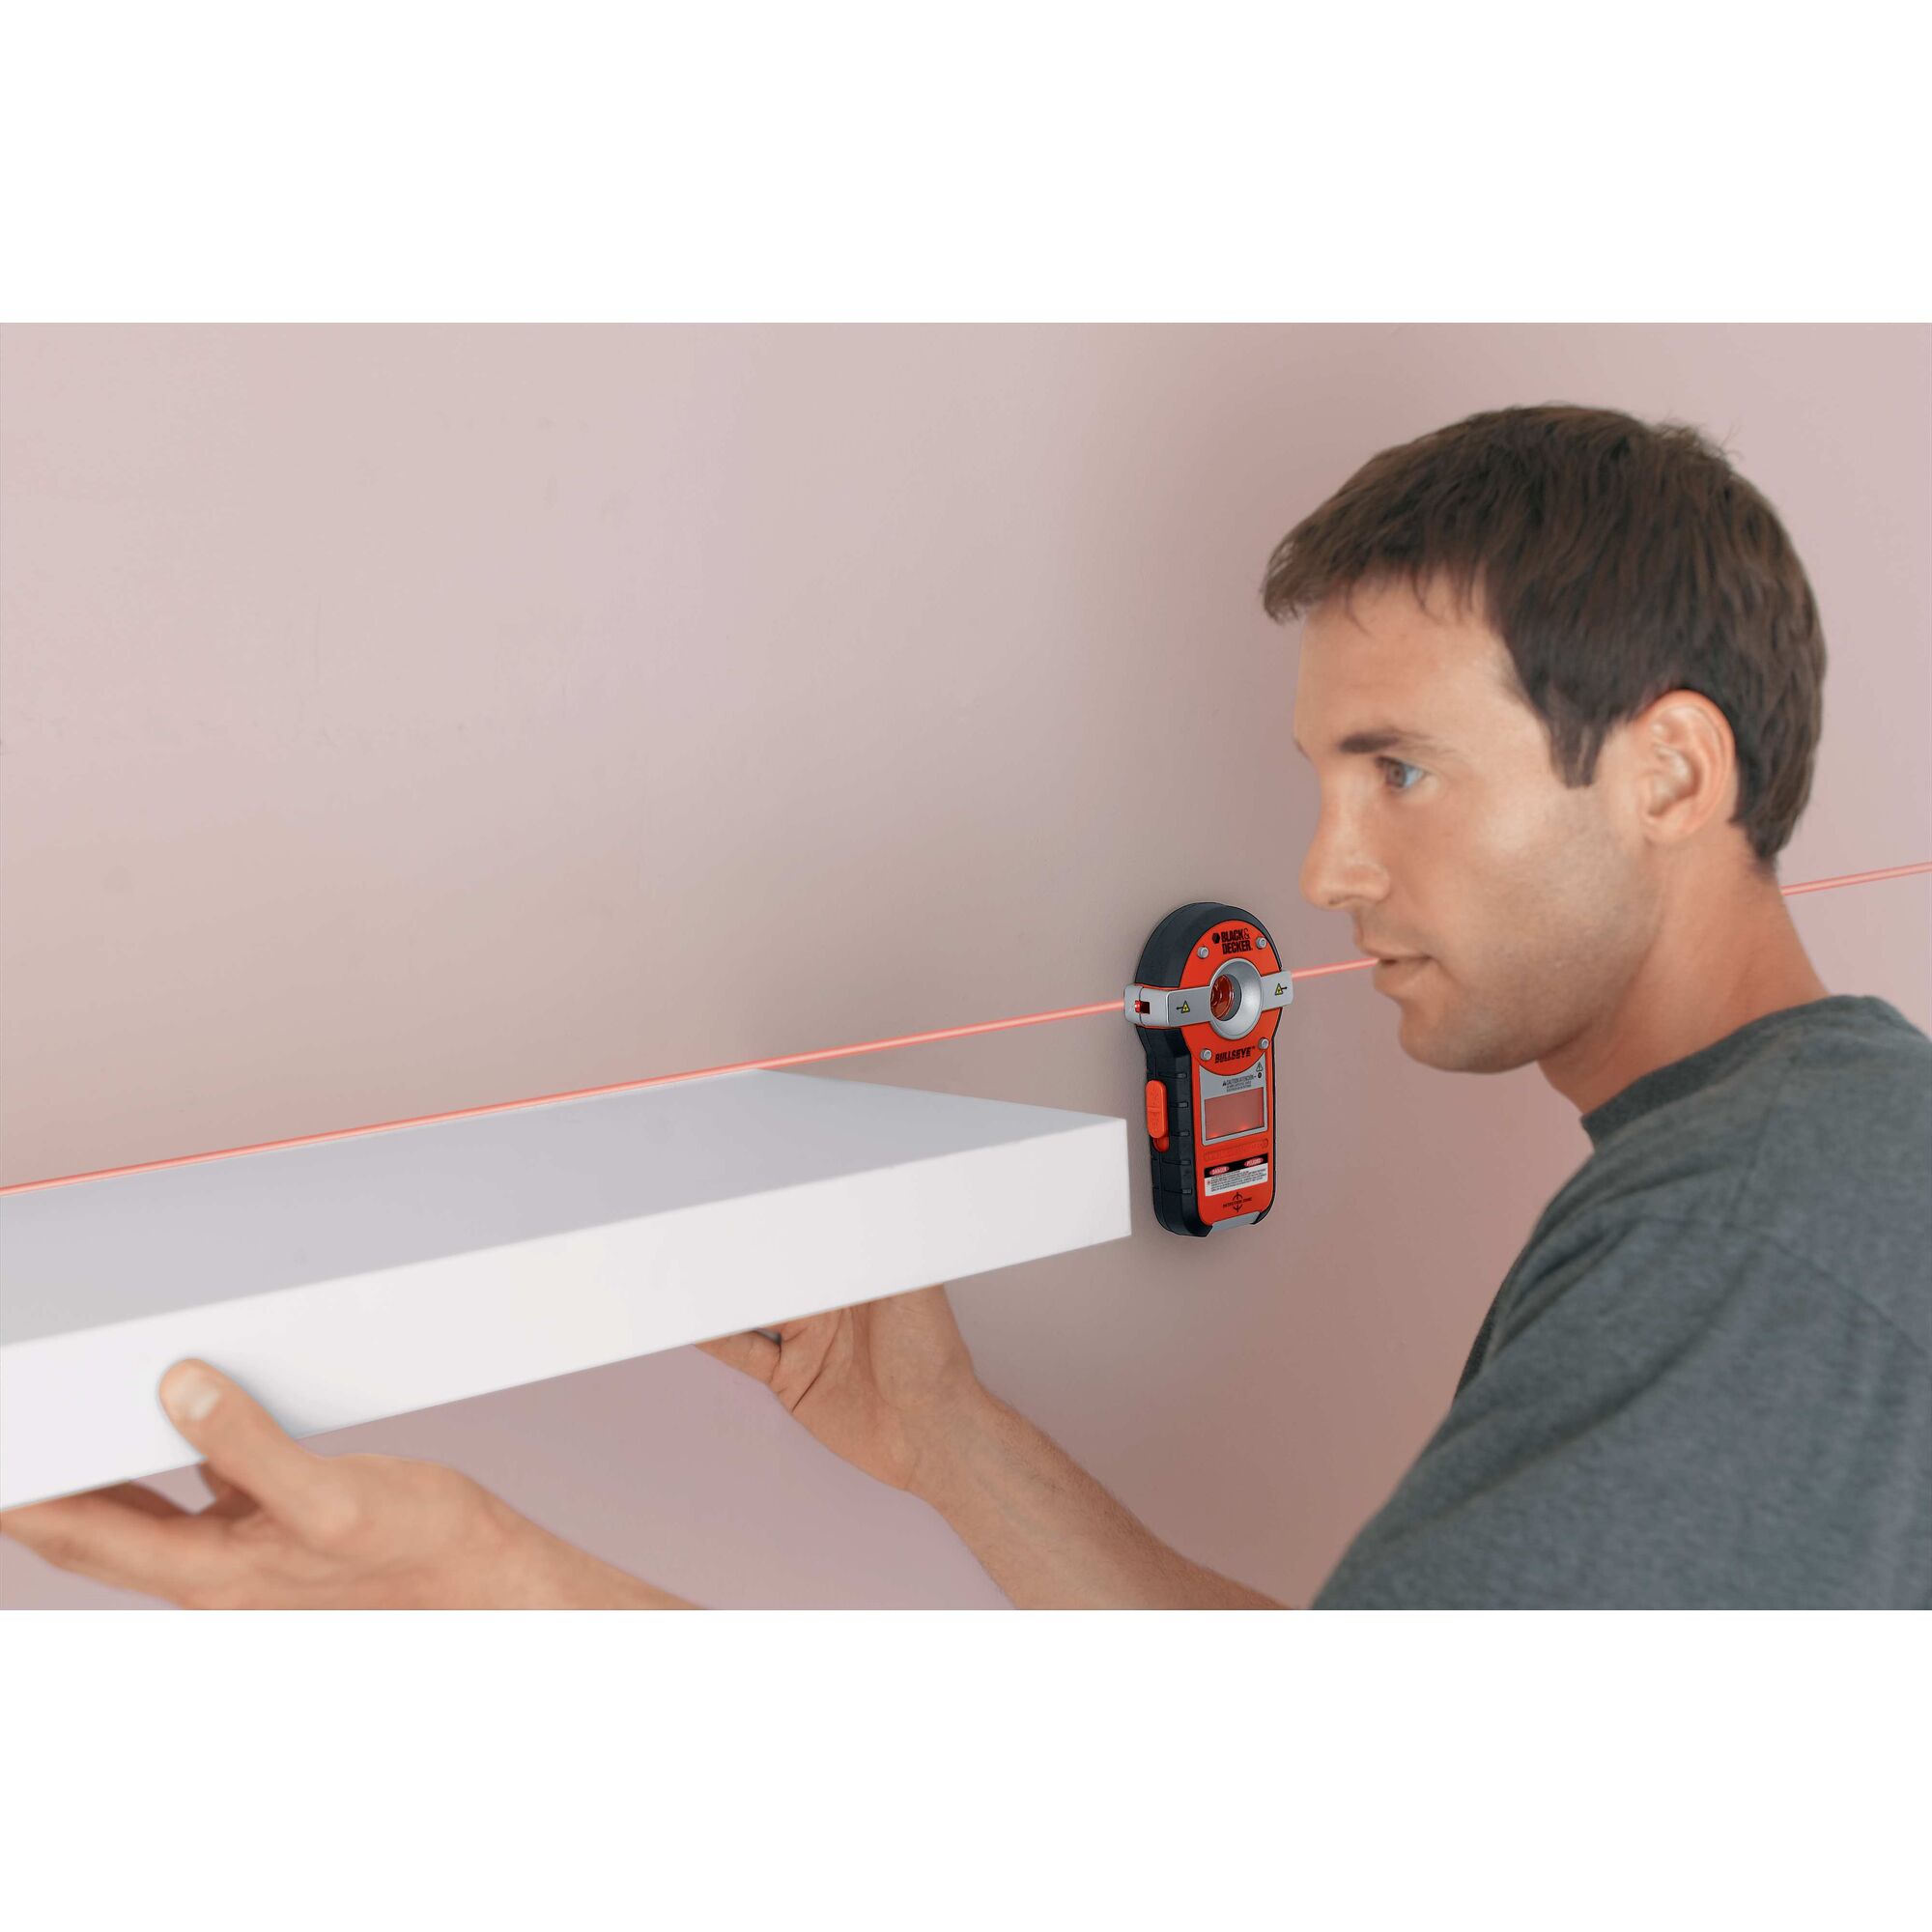 BullsEye auto leveling laser with stud sensor being used by a person to install a shelf.